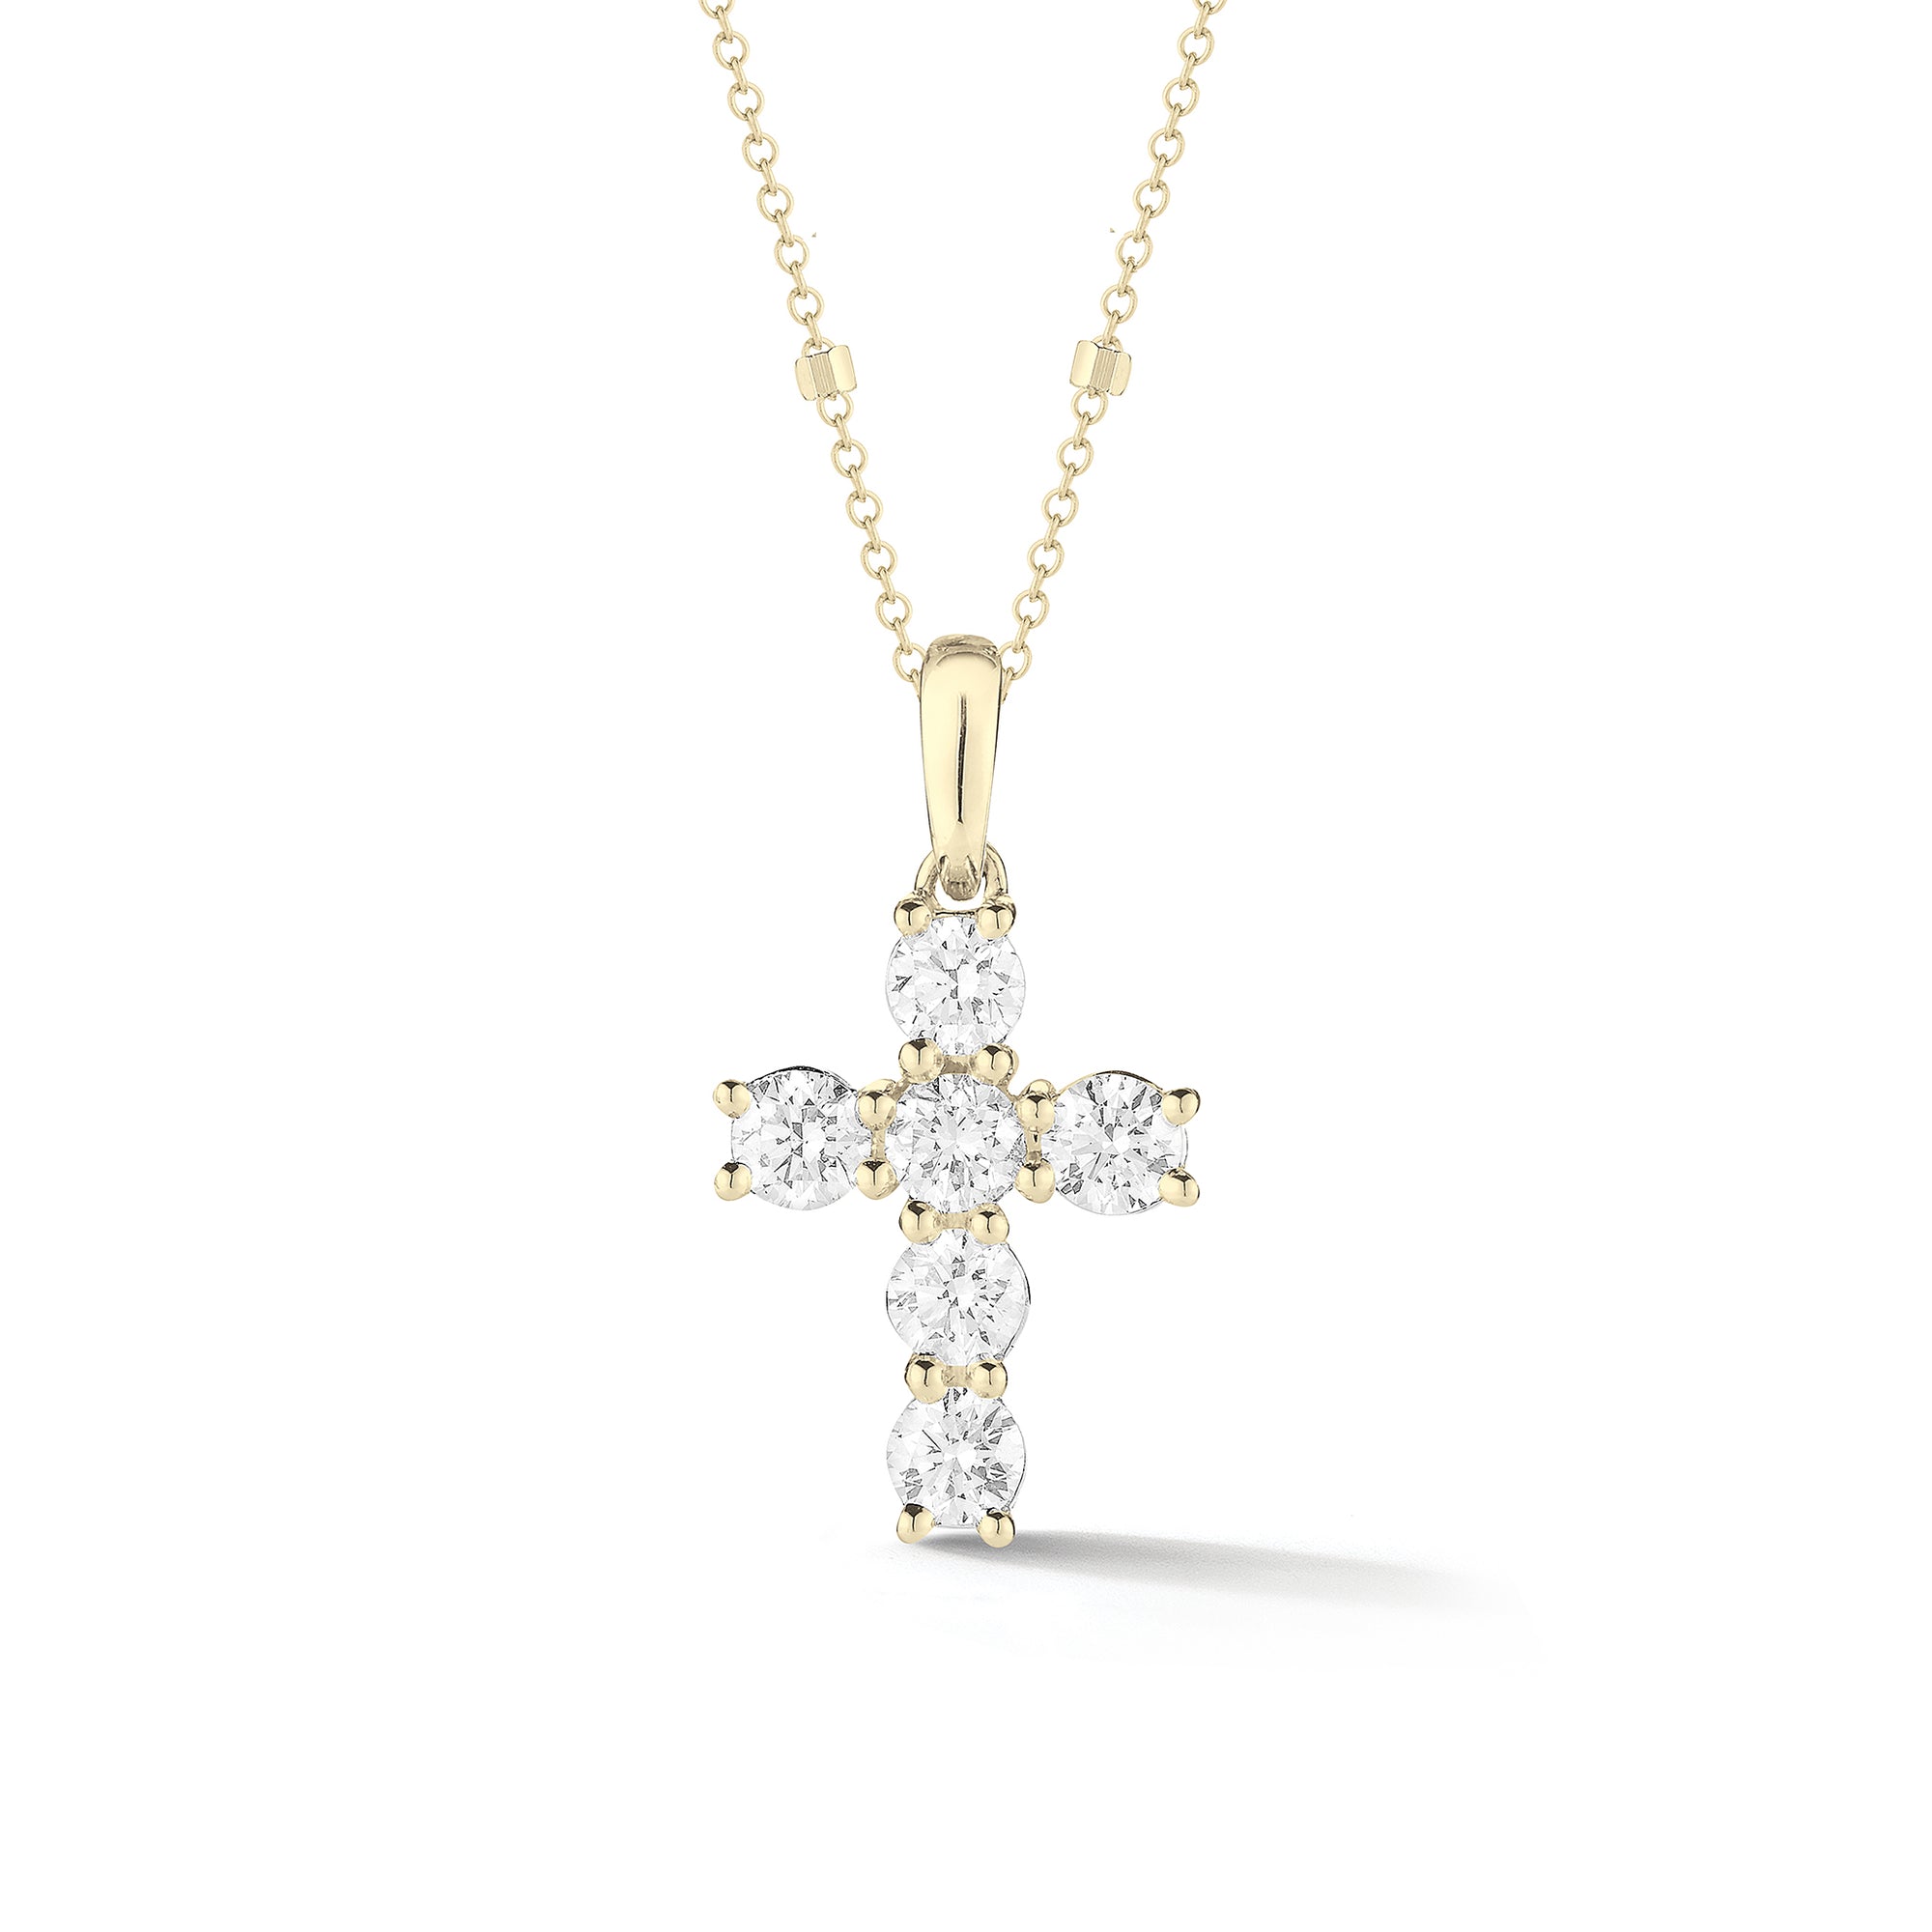 Mini Diamond Cross Pendant with Gold Accented Chain  -18K gold weighing 1.58 grams  -6 round shared prong-set brilliant diamonds totaling 0.87 carats